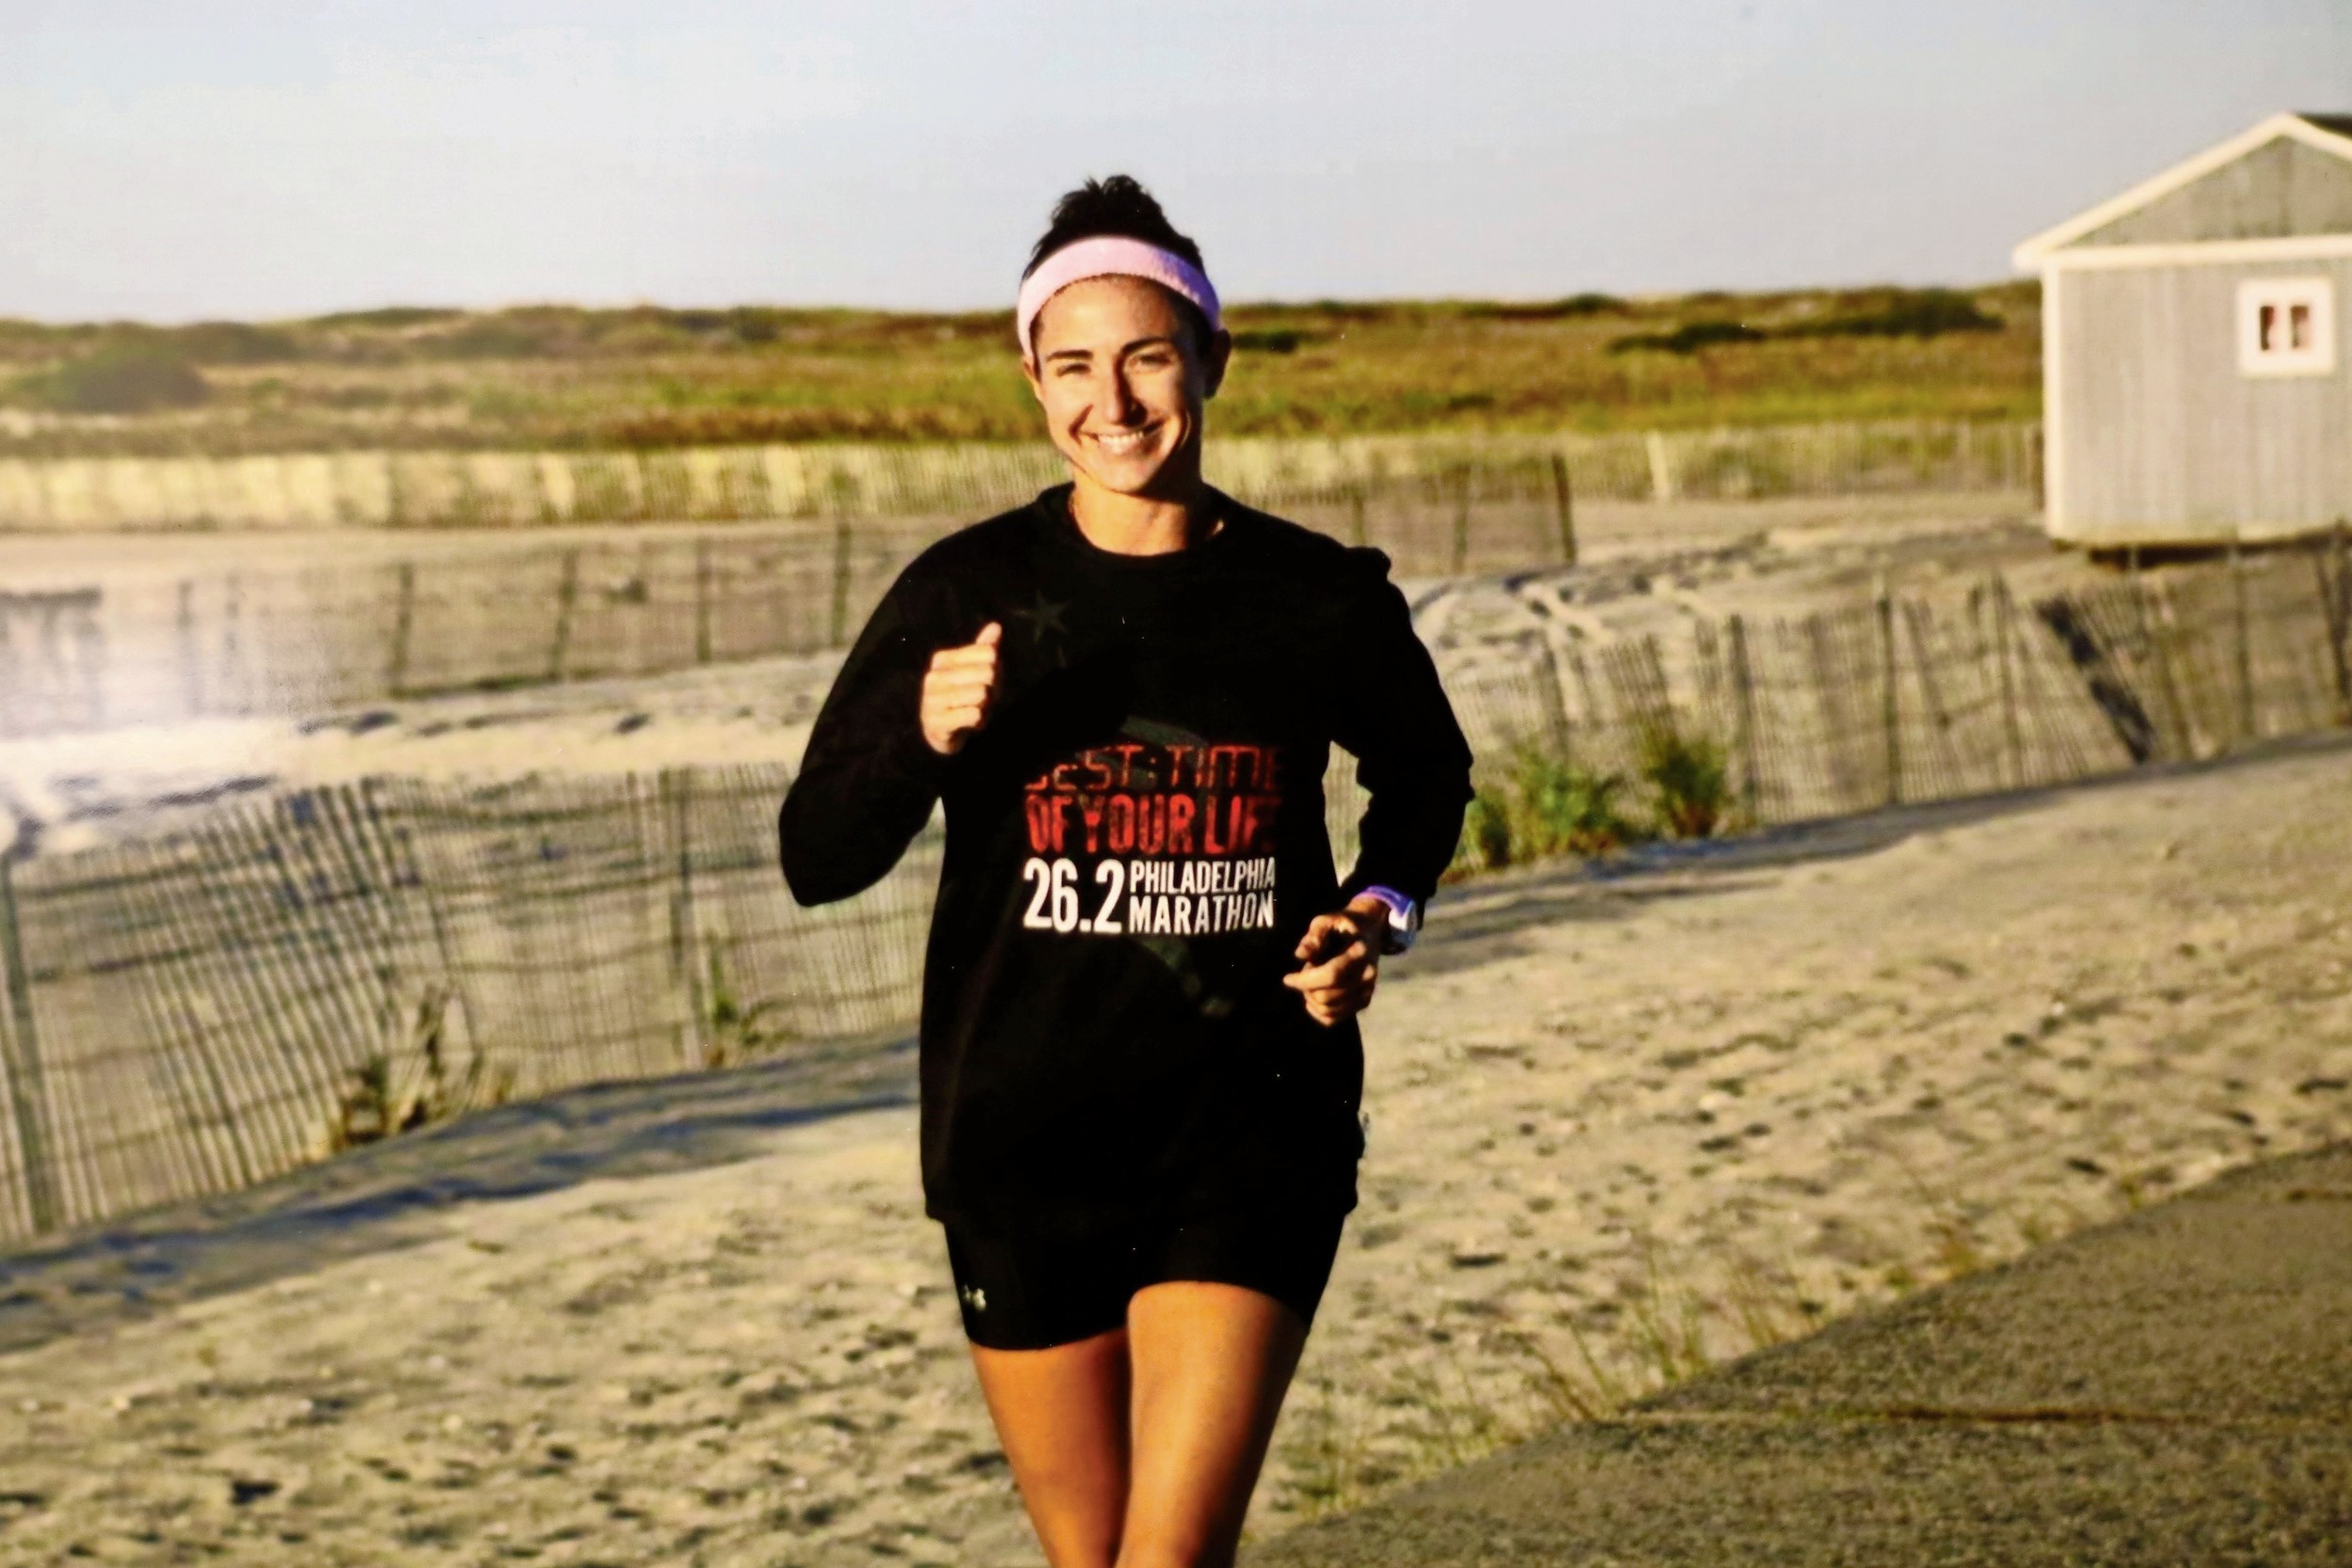 Perno-Grosser competed in the Bethpage Ocean to Sound Relay, sponsored by the Greater Long Island Running Club, at Jones Beach State Park.